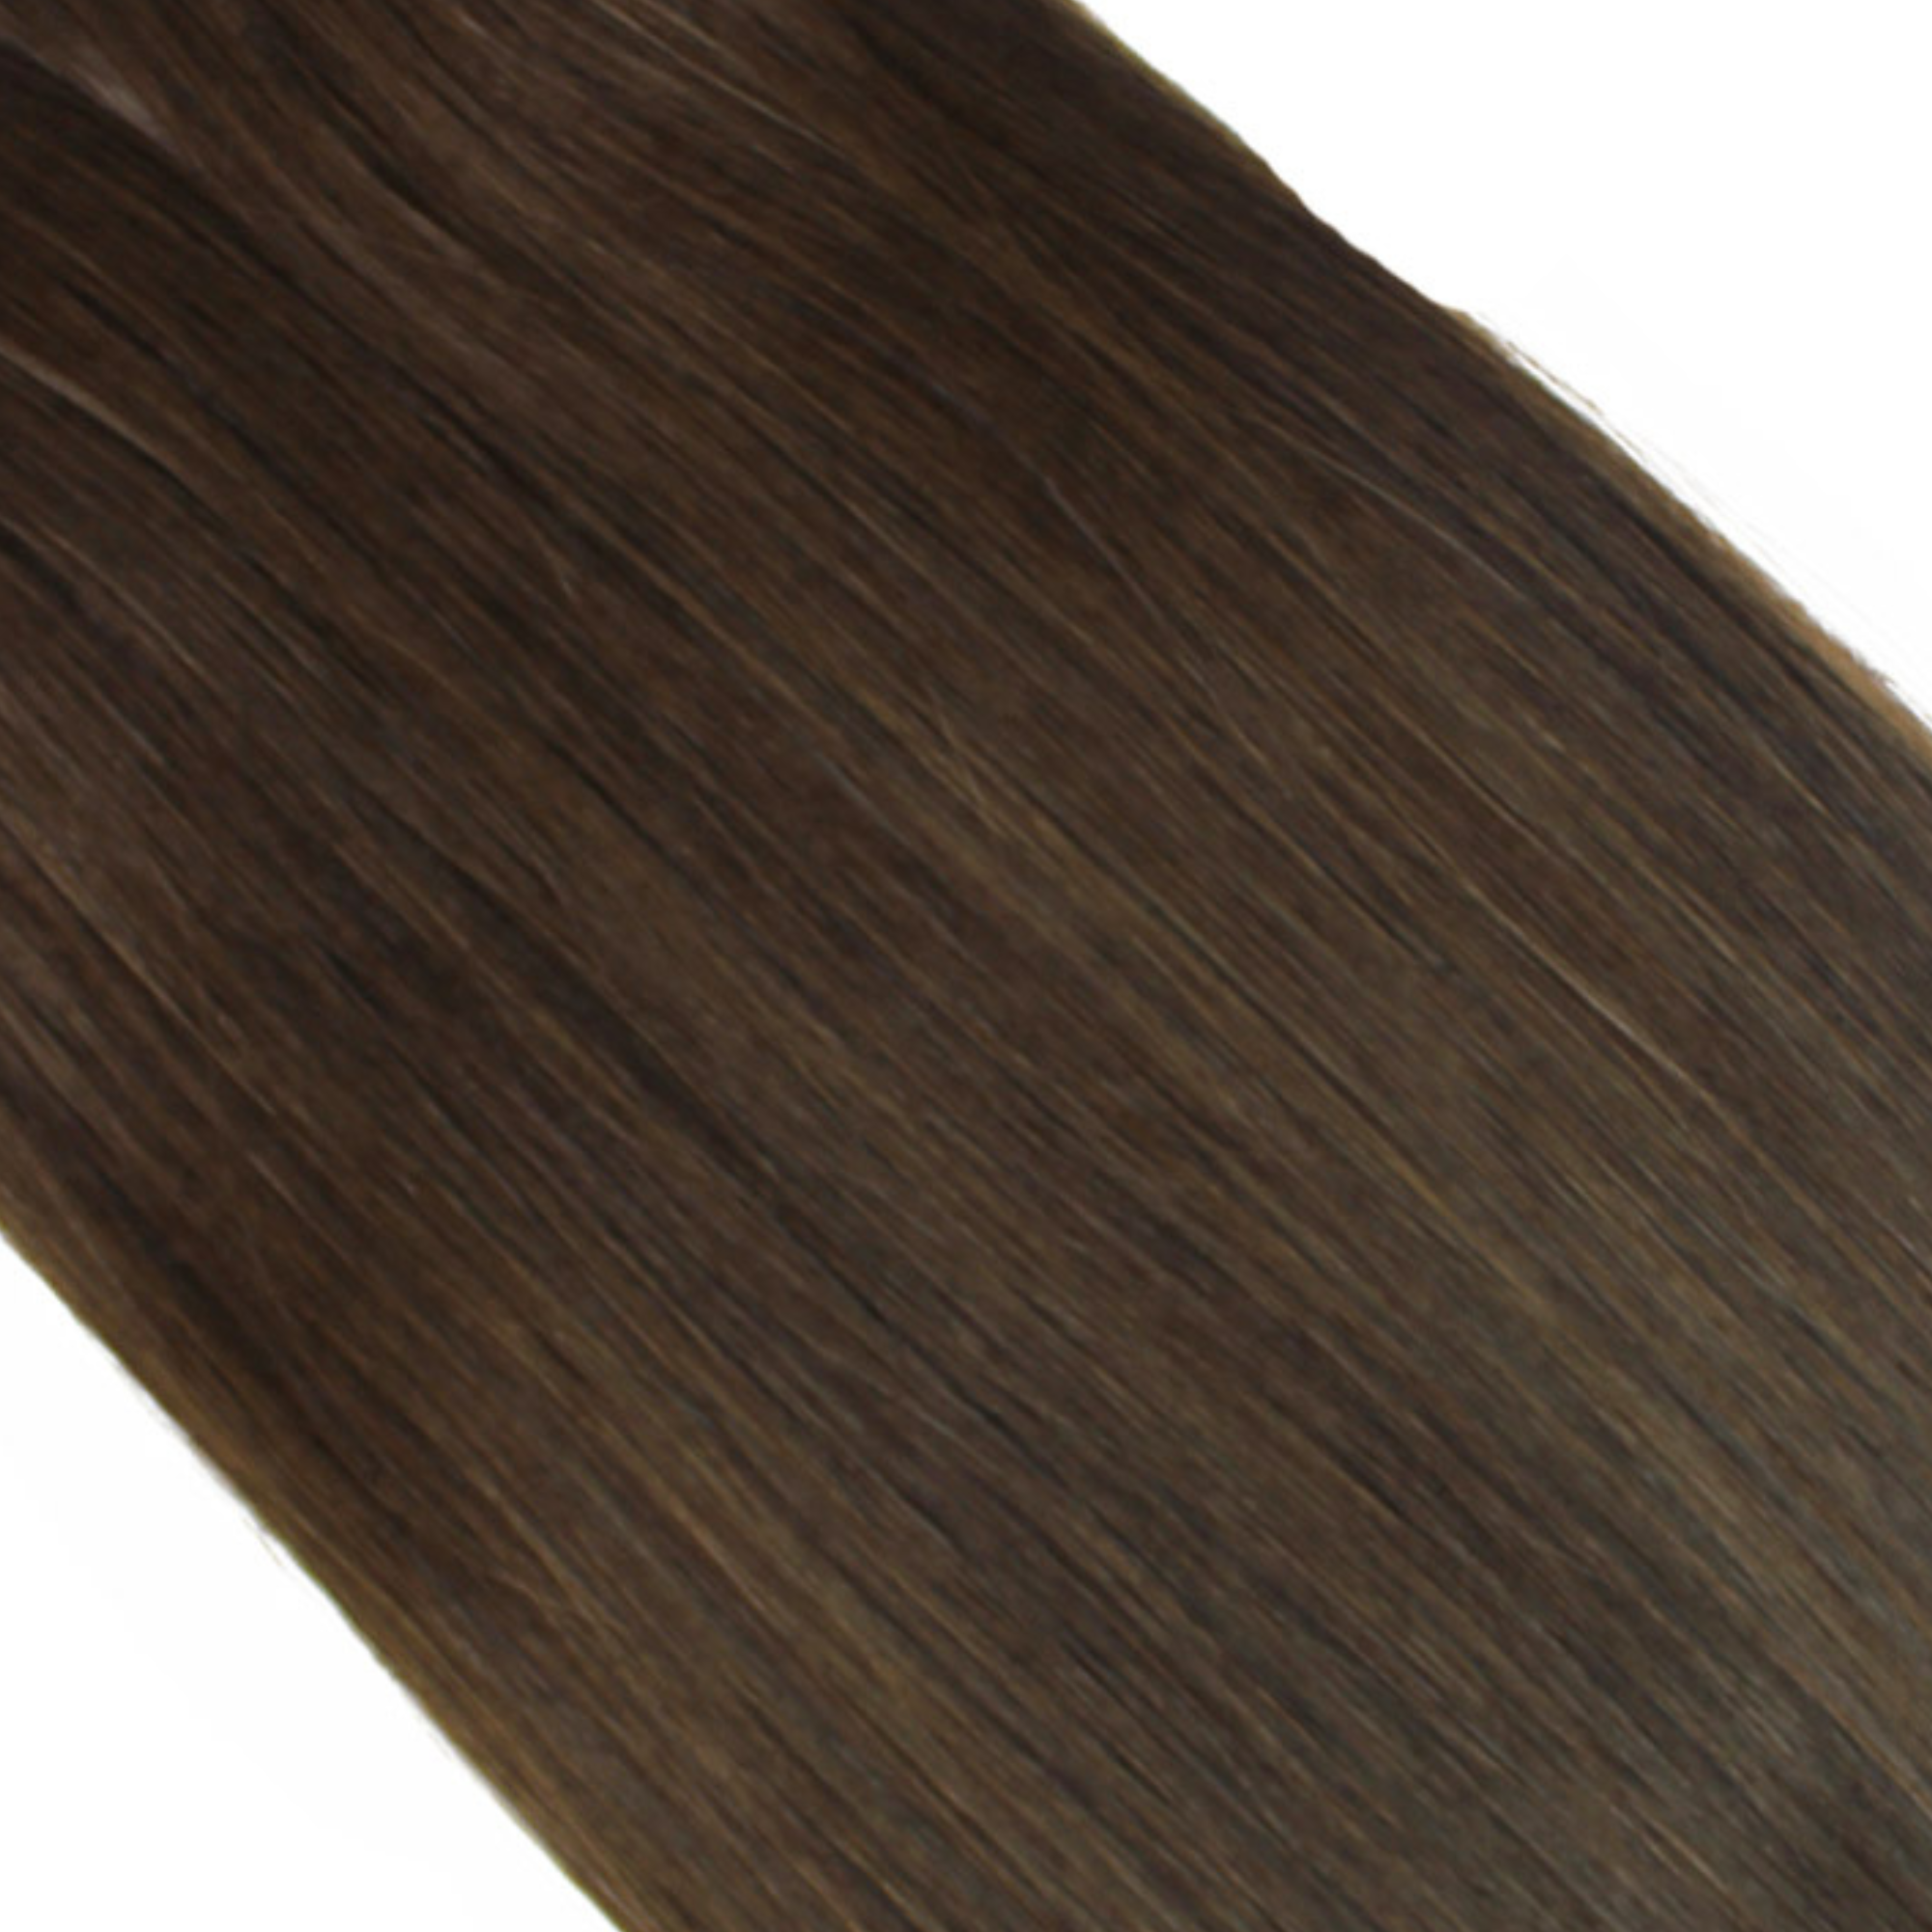 "hair rehab london 18" weft hair extensions shade swatch titled paparazzi perfect"